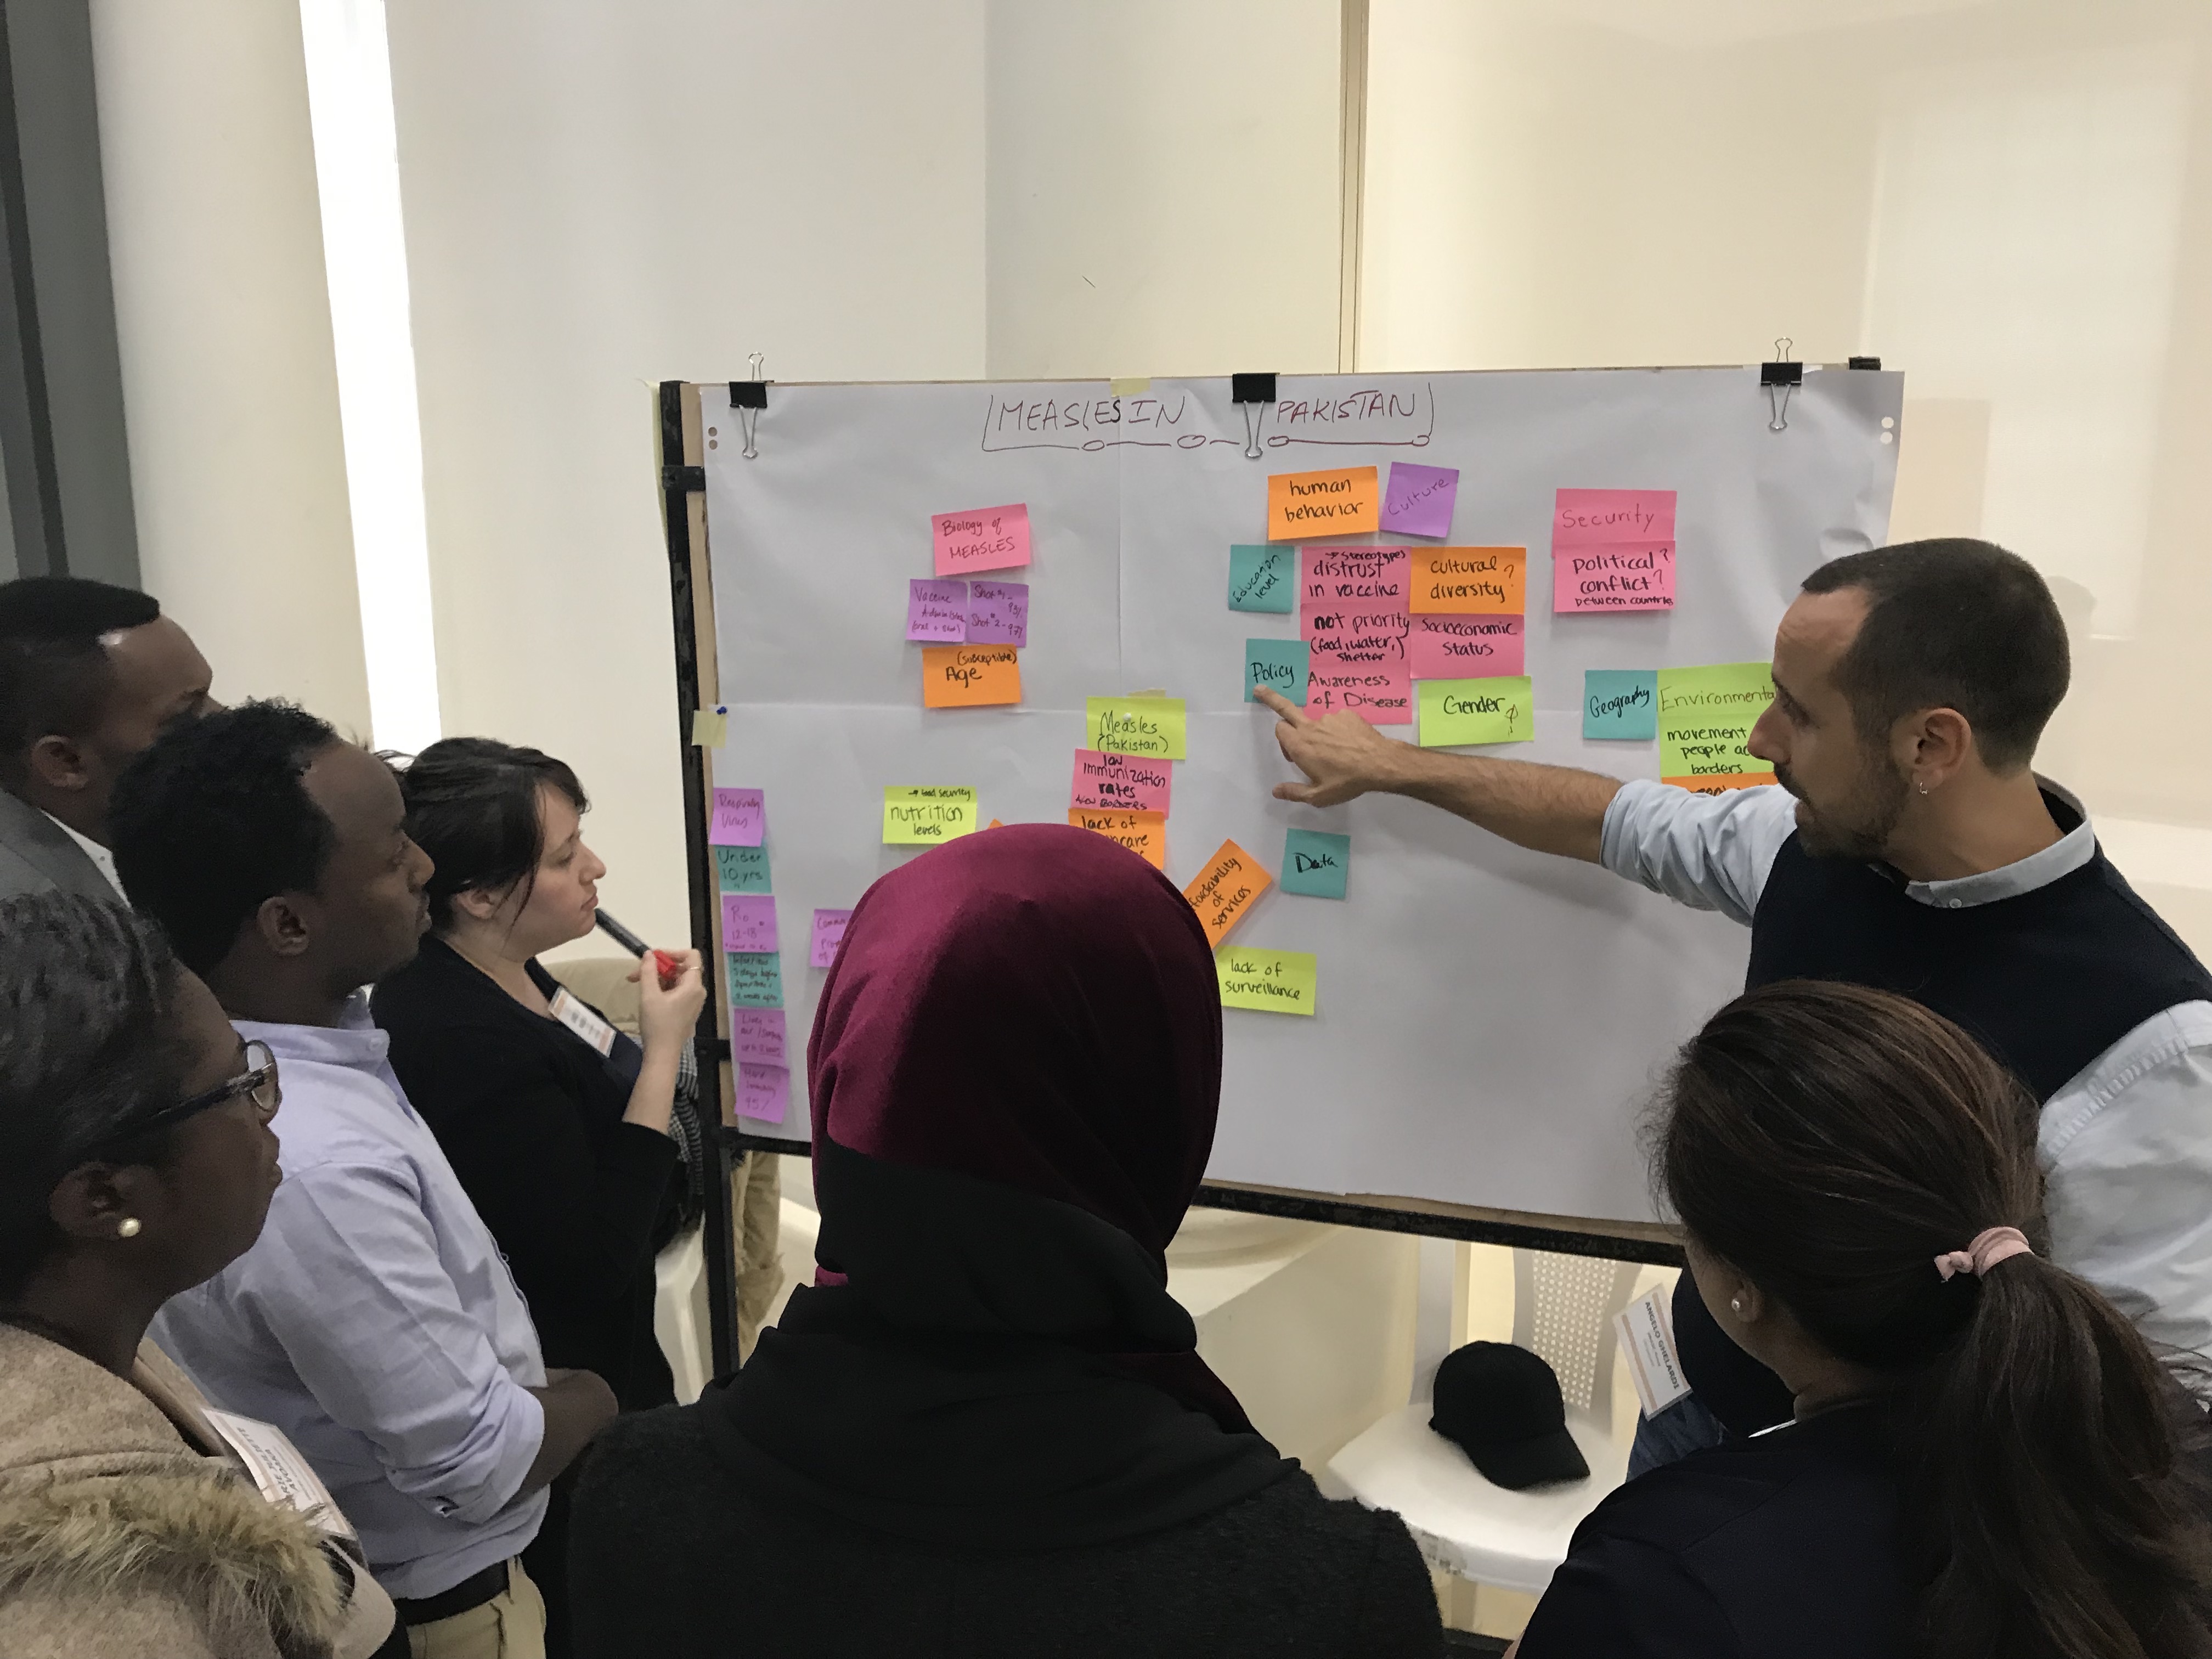 Beirut_systems mapping exercise